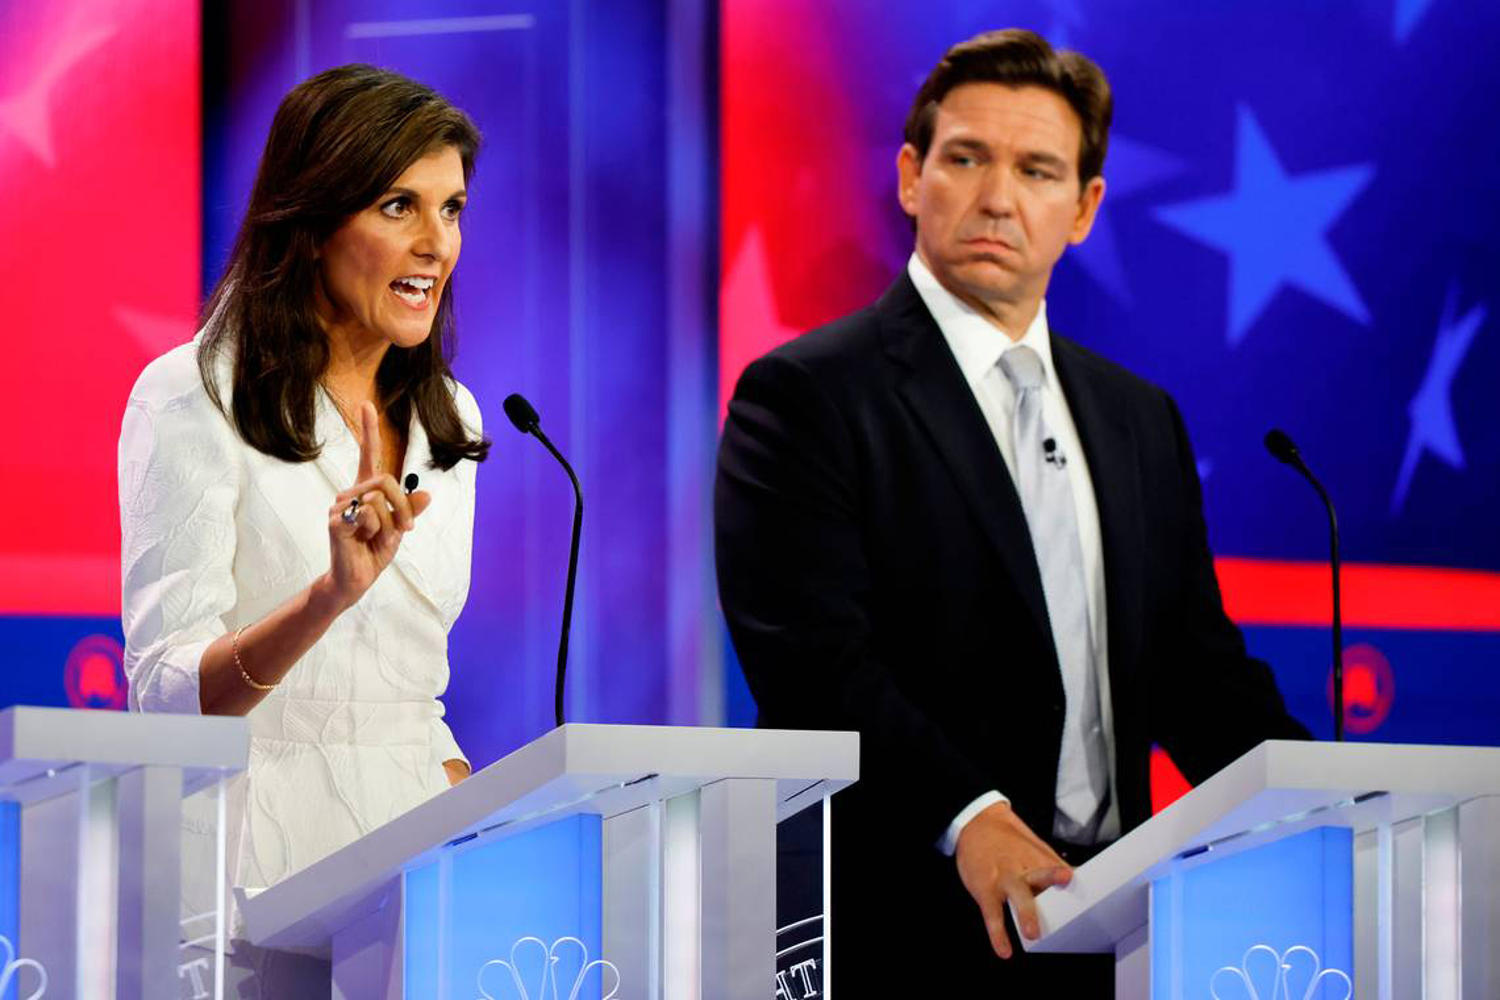 Nikki Haley and Ron DeSantis to face off in a debate as they look to close the gap on Trump's lead